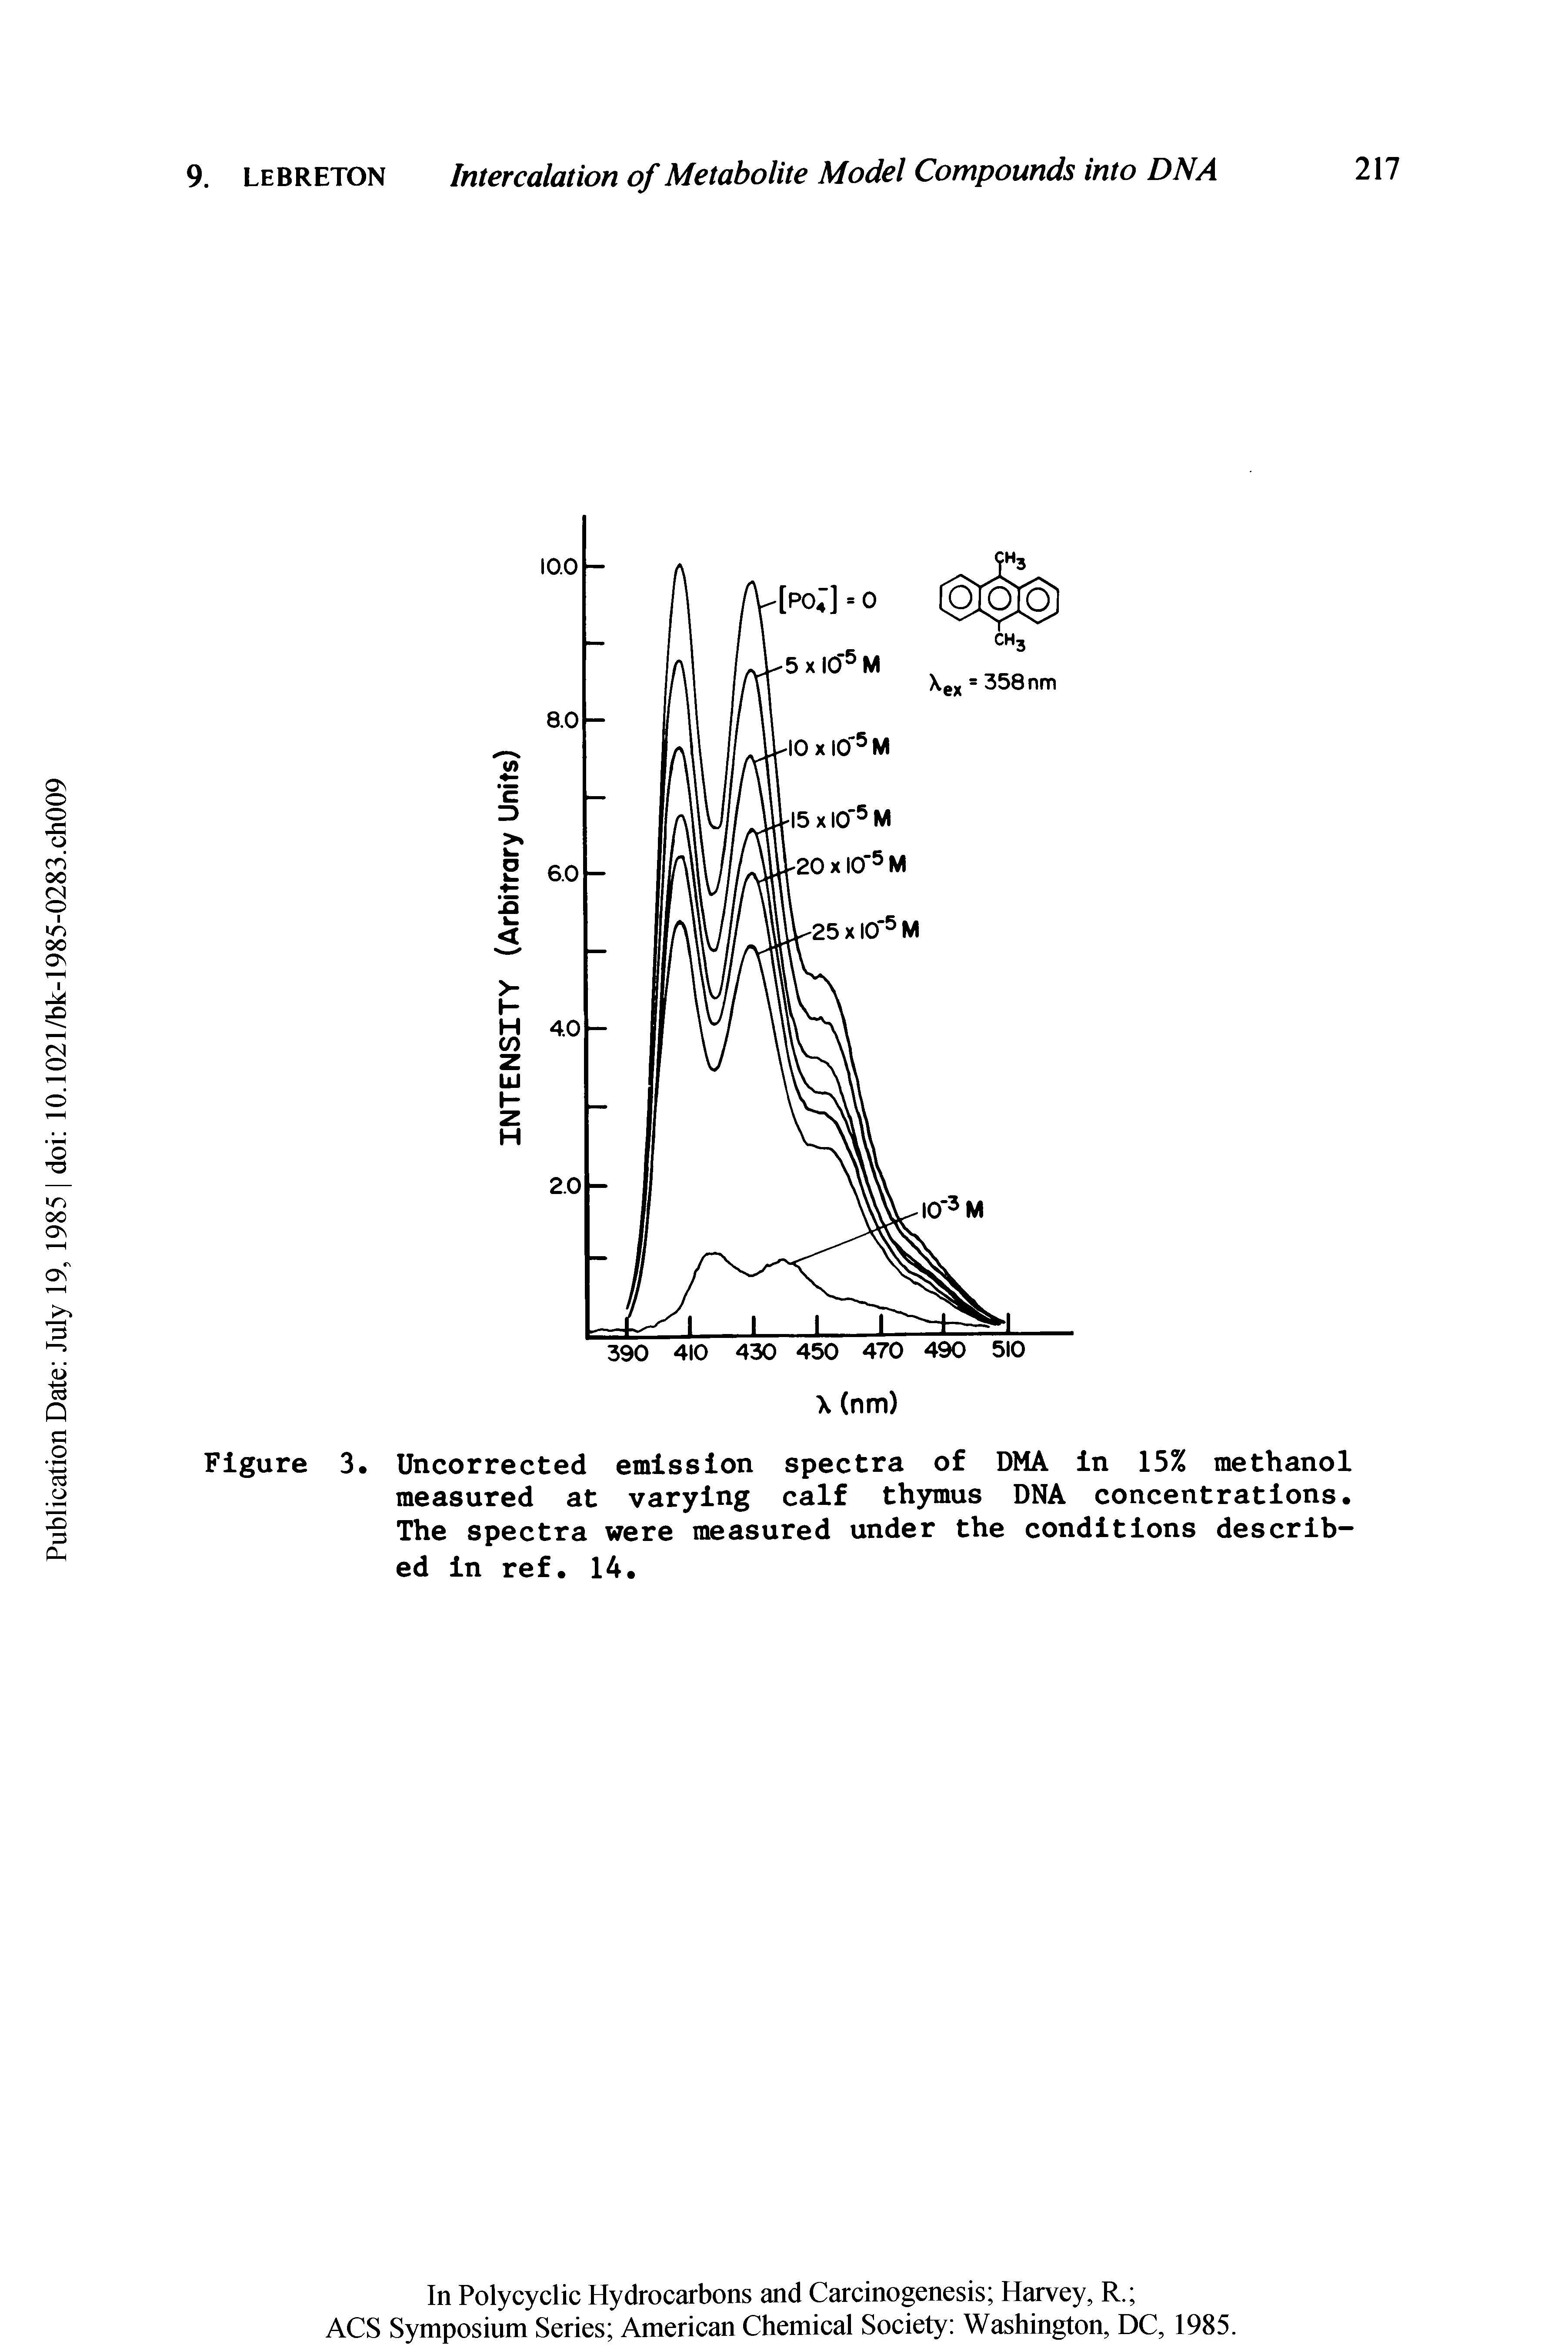 Figure 3. Uncorrected emission spectra of DMA in 15% methanol measured at varying calf thymus DNA concentrations. The spectra were measured under the conditions described in ref. 14.